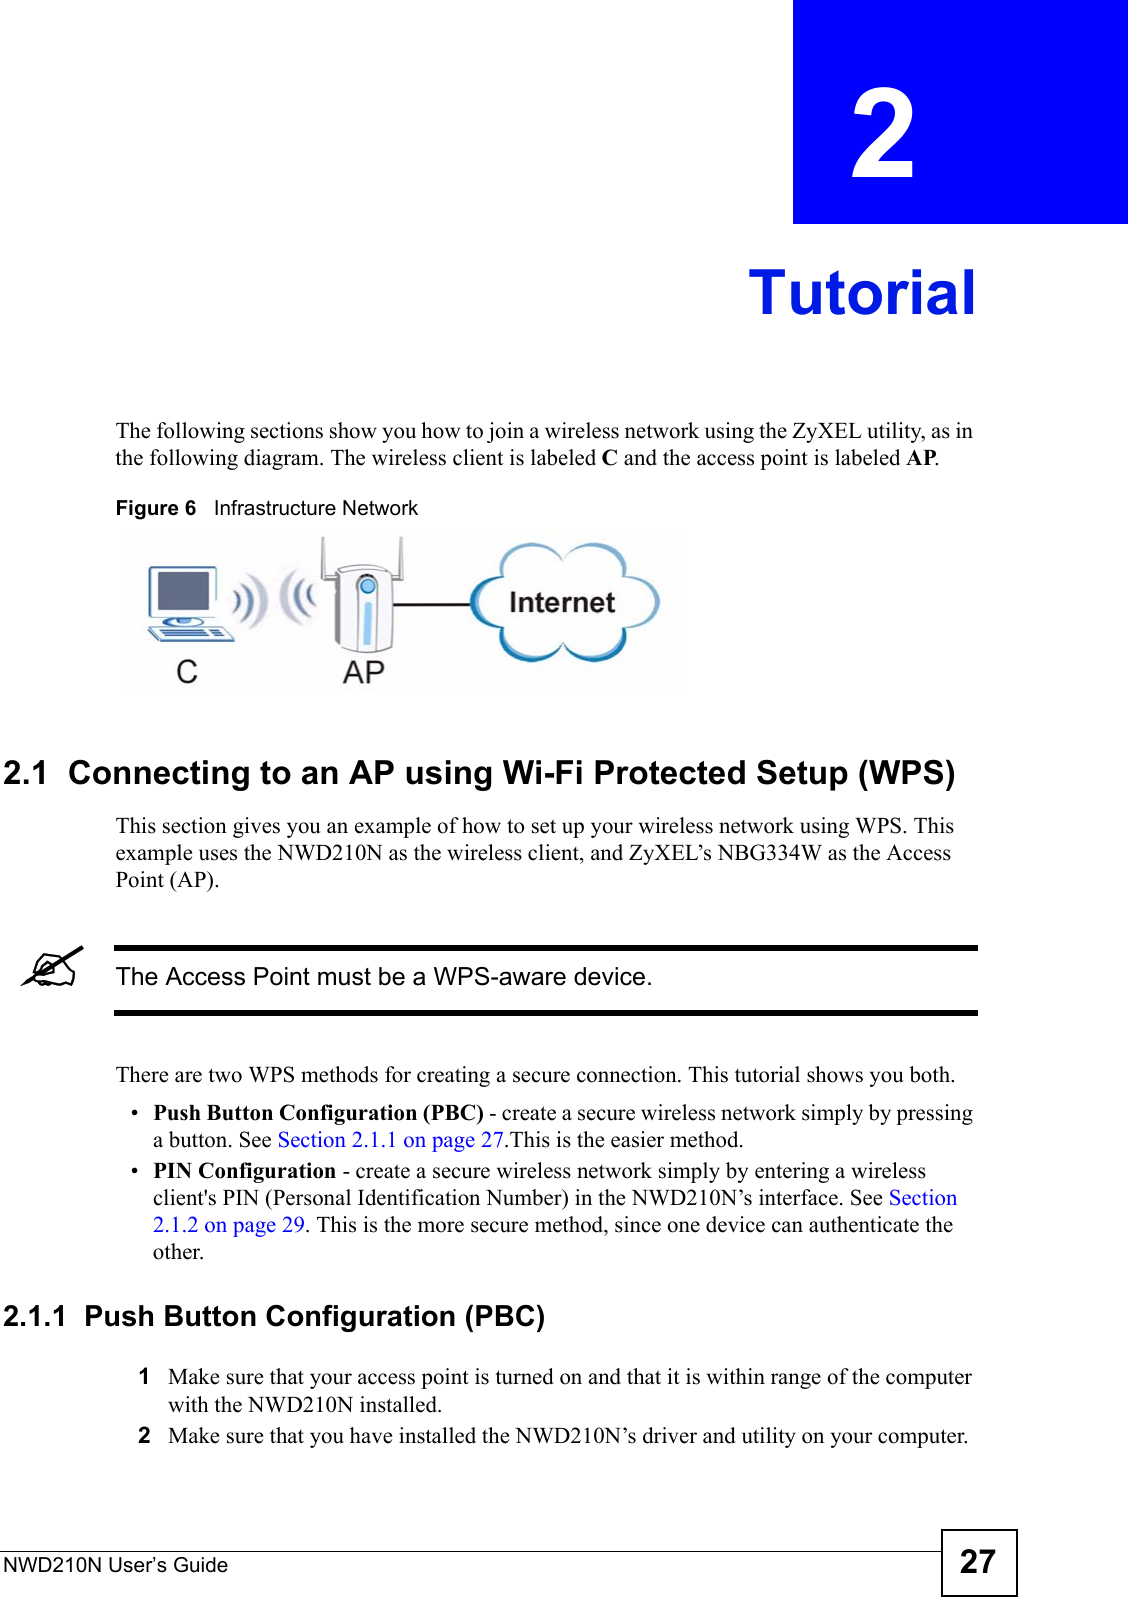 NWD210N User’s Guide 27CHAPTER  2 TutorialThe following sections show you how to join a wireless network using the ZyXEL utility, as in the following diagram. The wireless client is labeled C and the access point is labeled AP. Figure 6   Infrastructure Network2.1  Connecting to an AP using Wi-Fi Protected Setup (WPS)This section gives you an example of how to set up your wireless network using WPS. This example uses the NWD210N as the wireless client, and ZyXEL’s NBG334W as the Access Point (AP). &quot;The Access Point must be a WPS-aware device.There are two WPS methods for creating a secure connection. This tutorial shows you both.•Push Button Configuration (PBC) - create a secure wireless network simply by pressing a button. See Section 2.1.1 on page 27.This is the easier method.•PIN Configuration - create a secure wireless network simply by entering a wireless client&apos;s PIN (Personal Identification Number) in the NWD210N’s interface. See Section 2.1.2 on page 29. This is the more secure method, since one device can authenticate the other.2.1.1  Push Button Configuration (PBC)1Make sure that your access point is turned on and that it is within range of the computer with the NWD210N installed. 2Make sure that you have installed the NWD210N’s driver and utility on your computer.